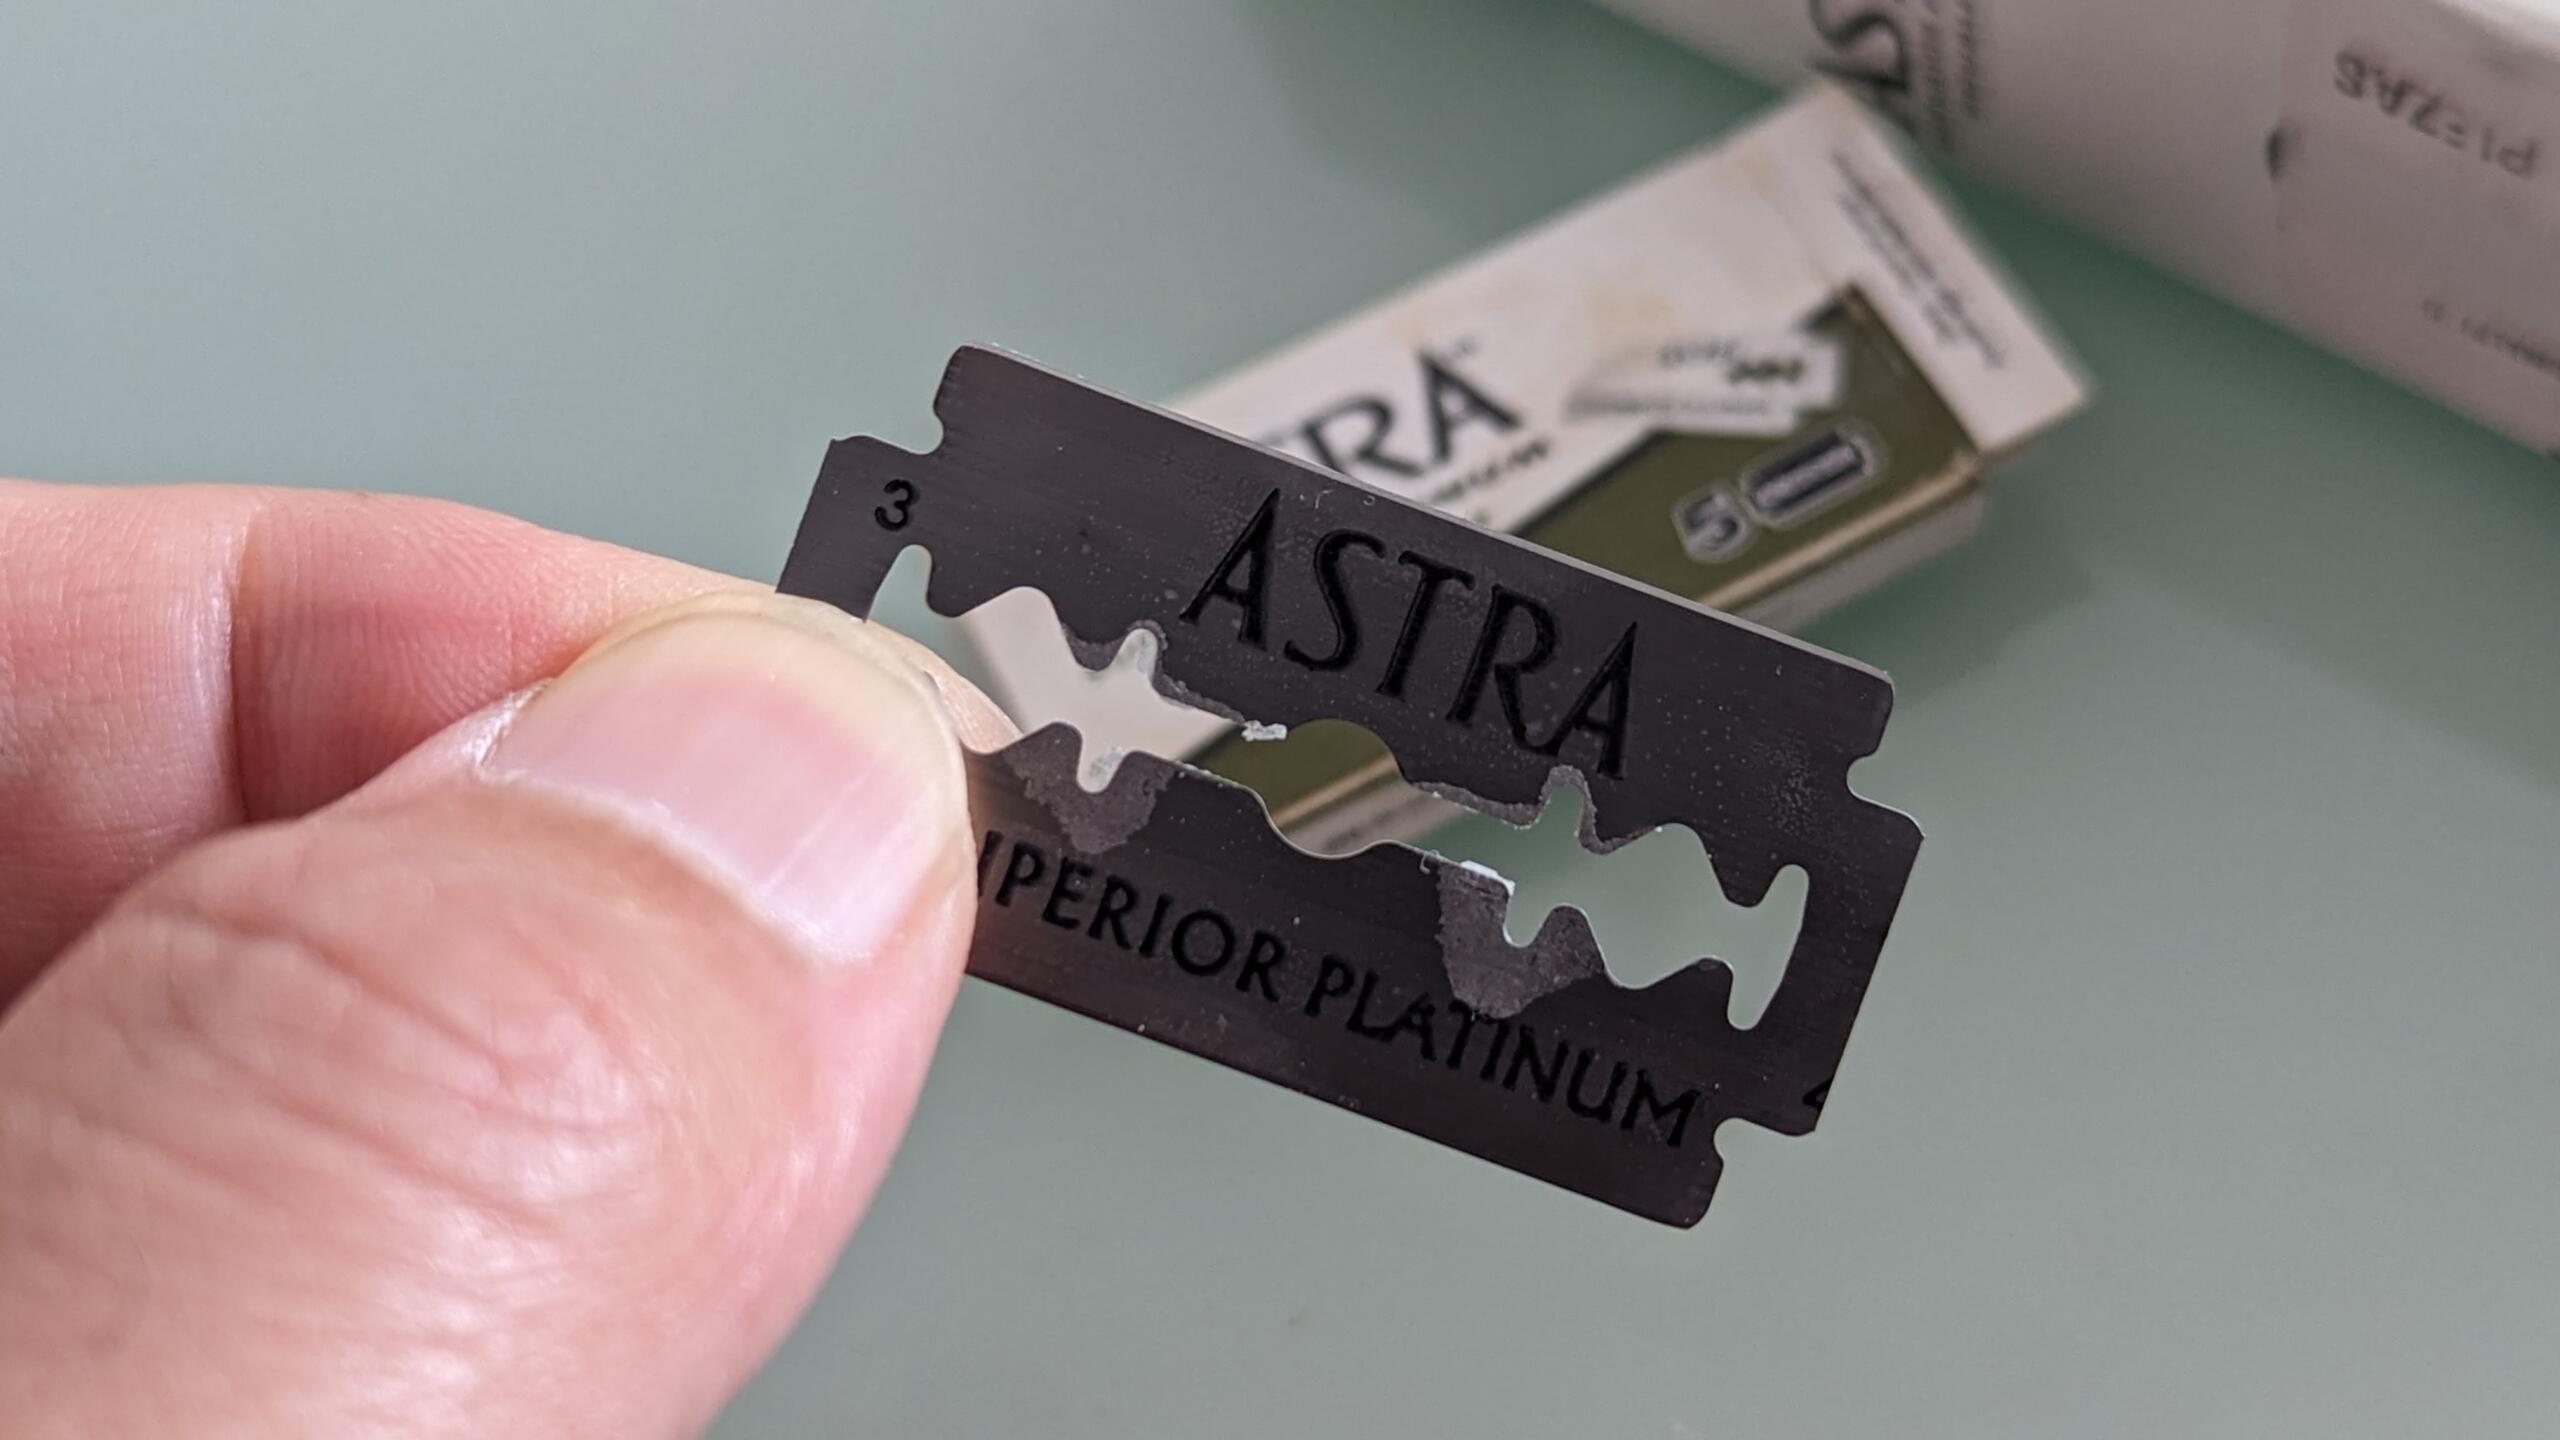 Understanding the Price Tag: Why Are Razor Blades Expensive?